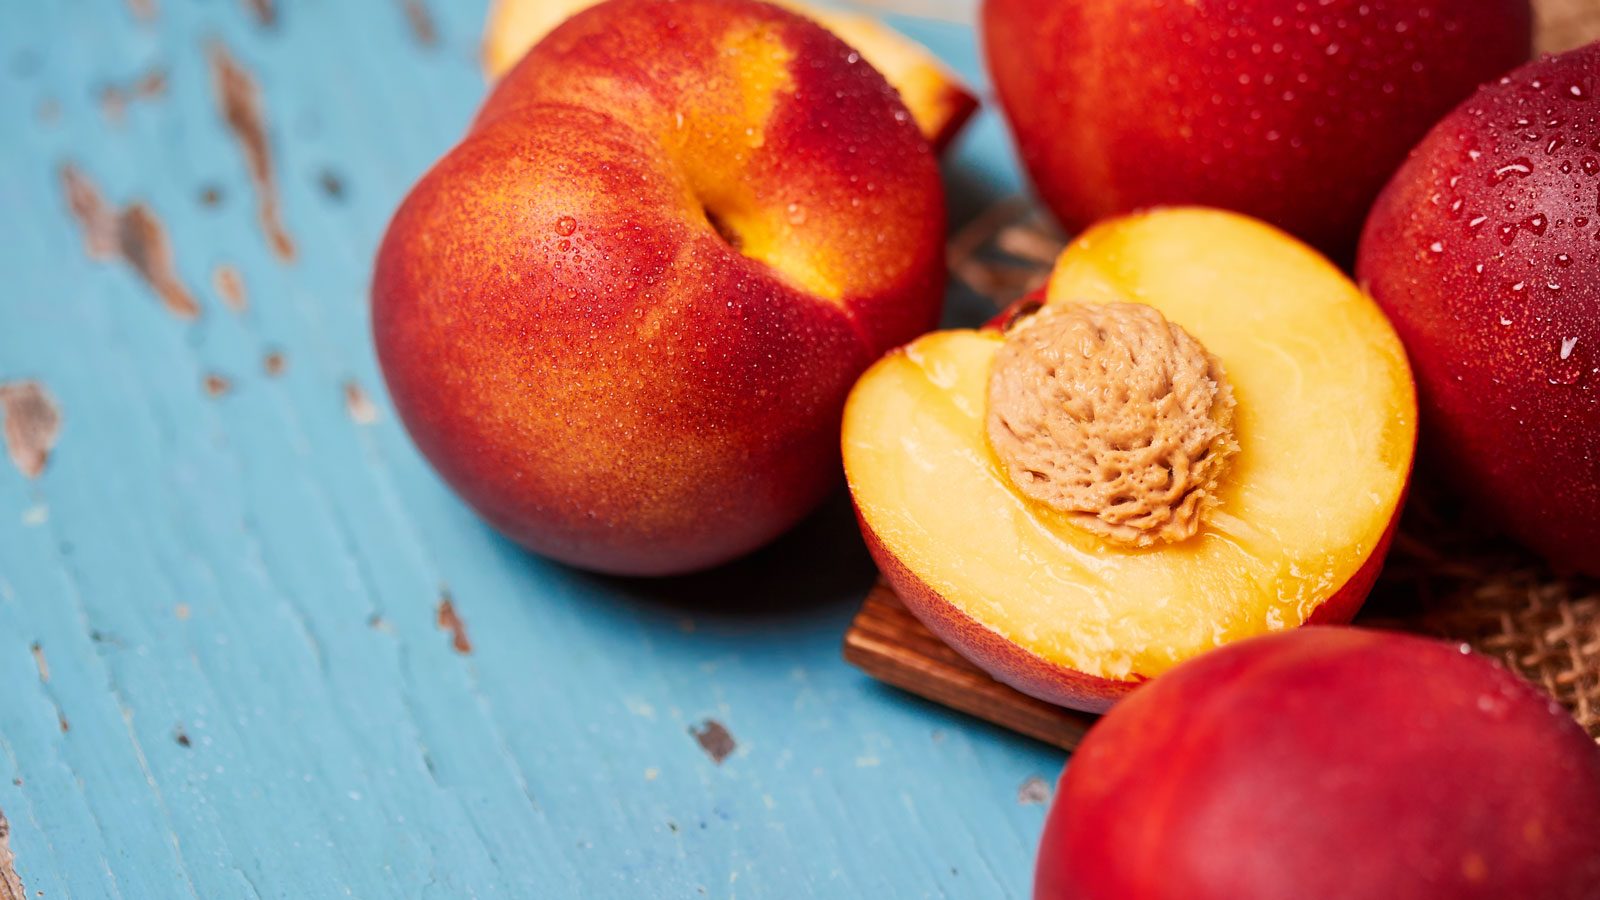 Use These Easy Steps for Freezing Nectarines